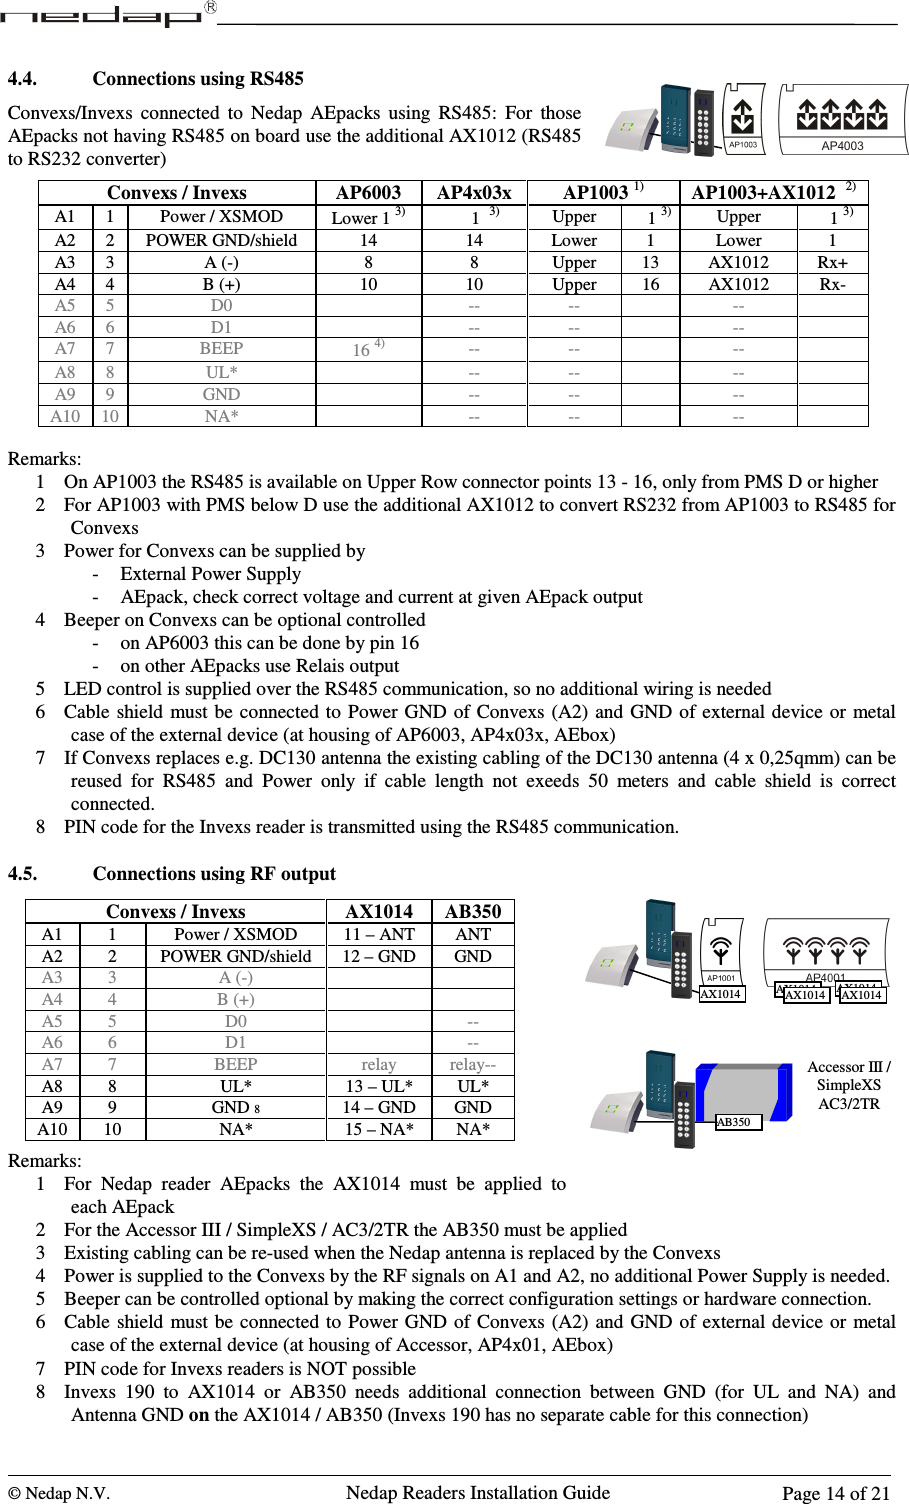  © Nedap N.V.                   Nedap Readers Installation Guide      Page 14 of 21 4.4. Connections using RS485 Convexs/Invexs  connected  to  Nedap  AEpacks  using  RS485:  For  those AEpacks not having RS485 on board use the additional AX1012 (RS485 to RS232 converter)             Remarks: 1 On AP1003 the RS485 is available on Upper Row connector points 13 - 16, only from PMS D or higher 2 For AP1003 with PMS below D use the additional AX1012 to convert RS232 from AP1003 to RS485 for Convexs 3 Power for Convexs can be supplied by - External Power Supply - AEpack, check correct voltage and current at given AEpack output 4 Beeper on Convexs can be optional controlled - on AP6003 this can be done by pin 16 - on other AEpacks use Relais output 5 LED control is supplied over the RS485 communication, so no additional wiring is needed 6 Cable  shield must be connected  to Power GND  of Convexs (A2)  and GND of external device or metal case of the external device (at housing of AP6003, AP4x03x, AEbox) 7 If Convexs replaces e.g. DC130 antenna the existing cabling of the DC130 antenna (4 x 0,25qmm) can be reused  for  RS485  and  Power  only  if  cable  length  not  exeeds  50  meters  and  cable  shield  is  correct connected. 8 PIN code for the Invexs reader is transmitted using the RS485 communication.  4.5. Connections using RF output            Remarks: 1 For  Nedap  reader  AEpacks  the  AX1014  must  be  applied  to each AEpack 2 For the Accessor III / SimpleXS / AC3/2TR the AB350 must be applied 3 Existing cabling can be re-used when the Nedap antenna is replaced by the Convexs 4 Power is supplied to the Convexs by the RF signals on A1 and A2, no additional Power Supply is needed. 5 Beeper can be controlled optional by making the correct configuration settings or hardware connection. 6 Cable  shield must be connected  to Power GND  of Convexs (A2)  and GND of external device or  metal case of the external device (at housing of Accessor, AP4x01, AEbox) 7 PIN code for Invexs readers is NOT possible 8 Invexs  190  to  AX1014  or  AB350  needs  additional  connection  between  GND  (for  UL  and  NA)  and Antenna GND on the AX1014 / AB350 (Invexs 190 has no separate cable for this connection) AX1014 AX1014 AX1014 AX1014 AX1014 Accessor III / SimpleXS AC3/2TR AB350 Convexs / Invexs  AP6003  AP4x03x  AP1003 1)  AP1003+AX1012  2) A1  1  Power / XSMOD  Lower 1 3)       1  3) Upper      1 3) Upper      1 3) A2  2  POWER GND/shield  14  14  Lower  1  Lower  1 A3  3  A (-)  8  8  Upper  13  AX1012  Rx+ A4  4  B (+)  10  10  Upper  16  AX1012  Rx- A5  5  D0    --  --    --   A6 6 D1  -- --  --  A7  7  BEEP  16 4) --  --    --   A8  8  UL*    --  --    --   A9  9  GND    --  --    --   A10  10 NA*    --  --    --    Convexs / Invexs  AX1014  AB350 A1  1  Power / XSMOD  11 – ANT  ANT A2  2  POWER GND/shield  12 – GND  GND A3  3  A (-)     A4  4  B (+)     A5  5  D0    -- A6  6  D1    -- A7  7  BEEP  relay  relay-- A8  8  UL*  13 – UL*  UL* A9  9  GND 8  14 – GND  GND A10  10  NA*  15 – NA*  NA*  123456789C0E123456789C0E123456789C0E